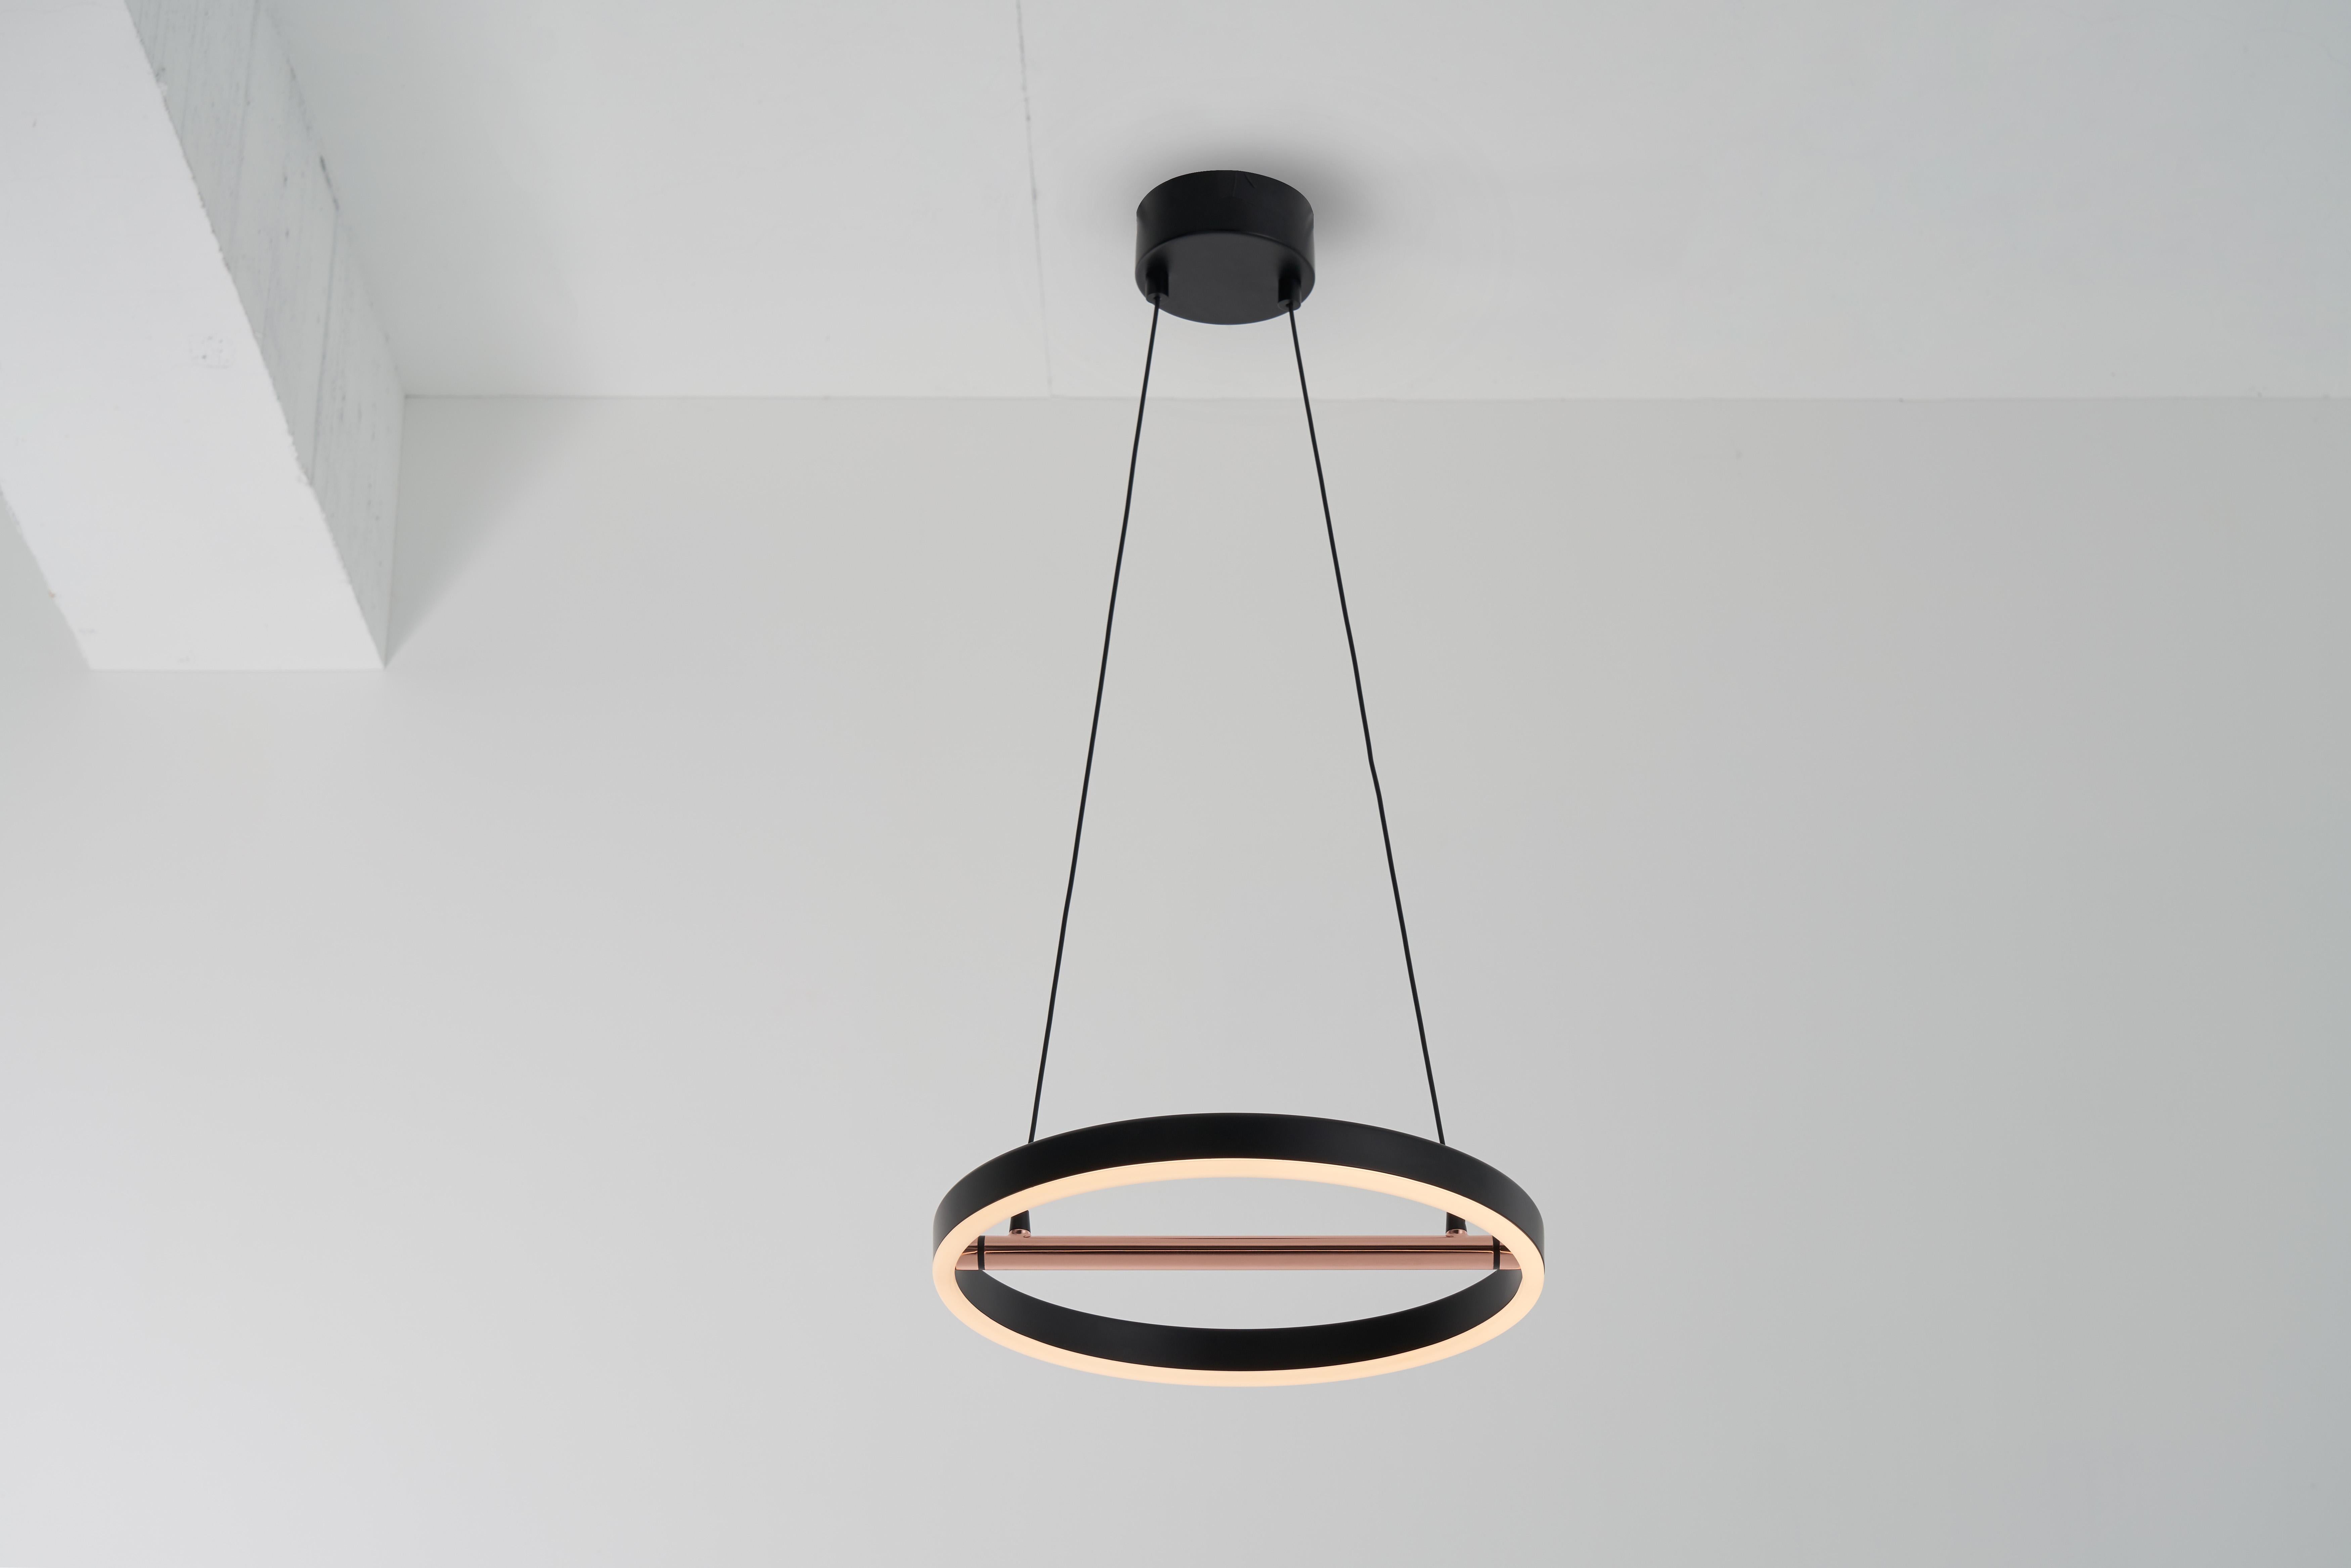 Sol collection is low-key design with elaborate consideration, consists of pendant, table lamp and even bow lamp type. Sol Pendant S ’s ring-like lampshade is finely affixed to a metallic luster balance bar, demonstrating the definition of